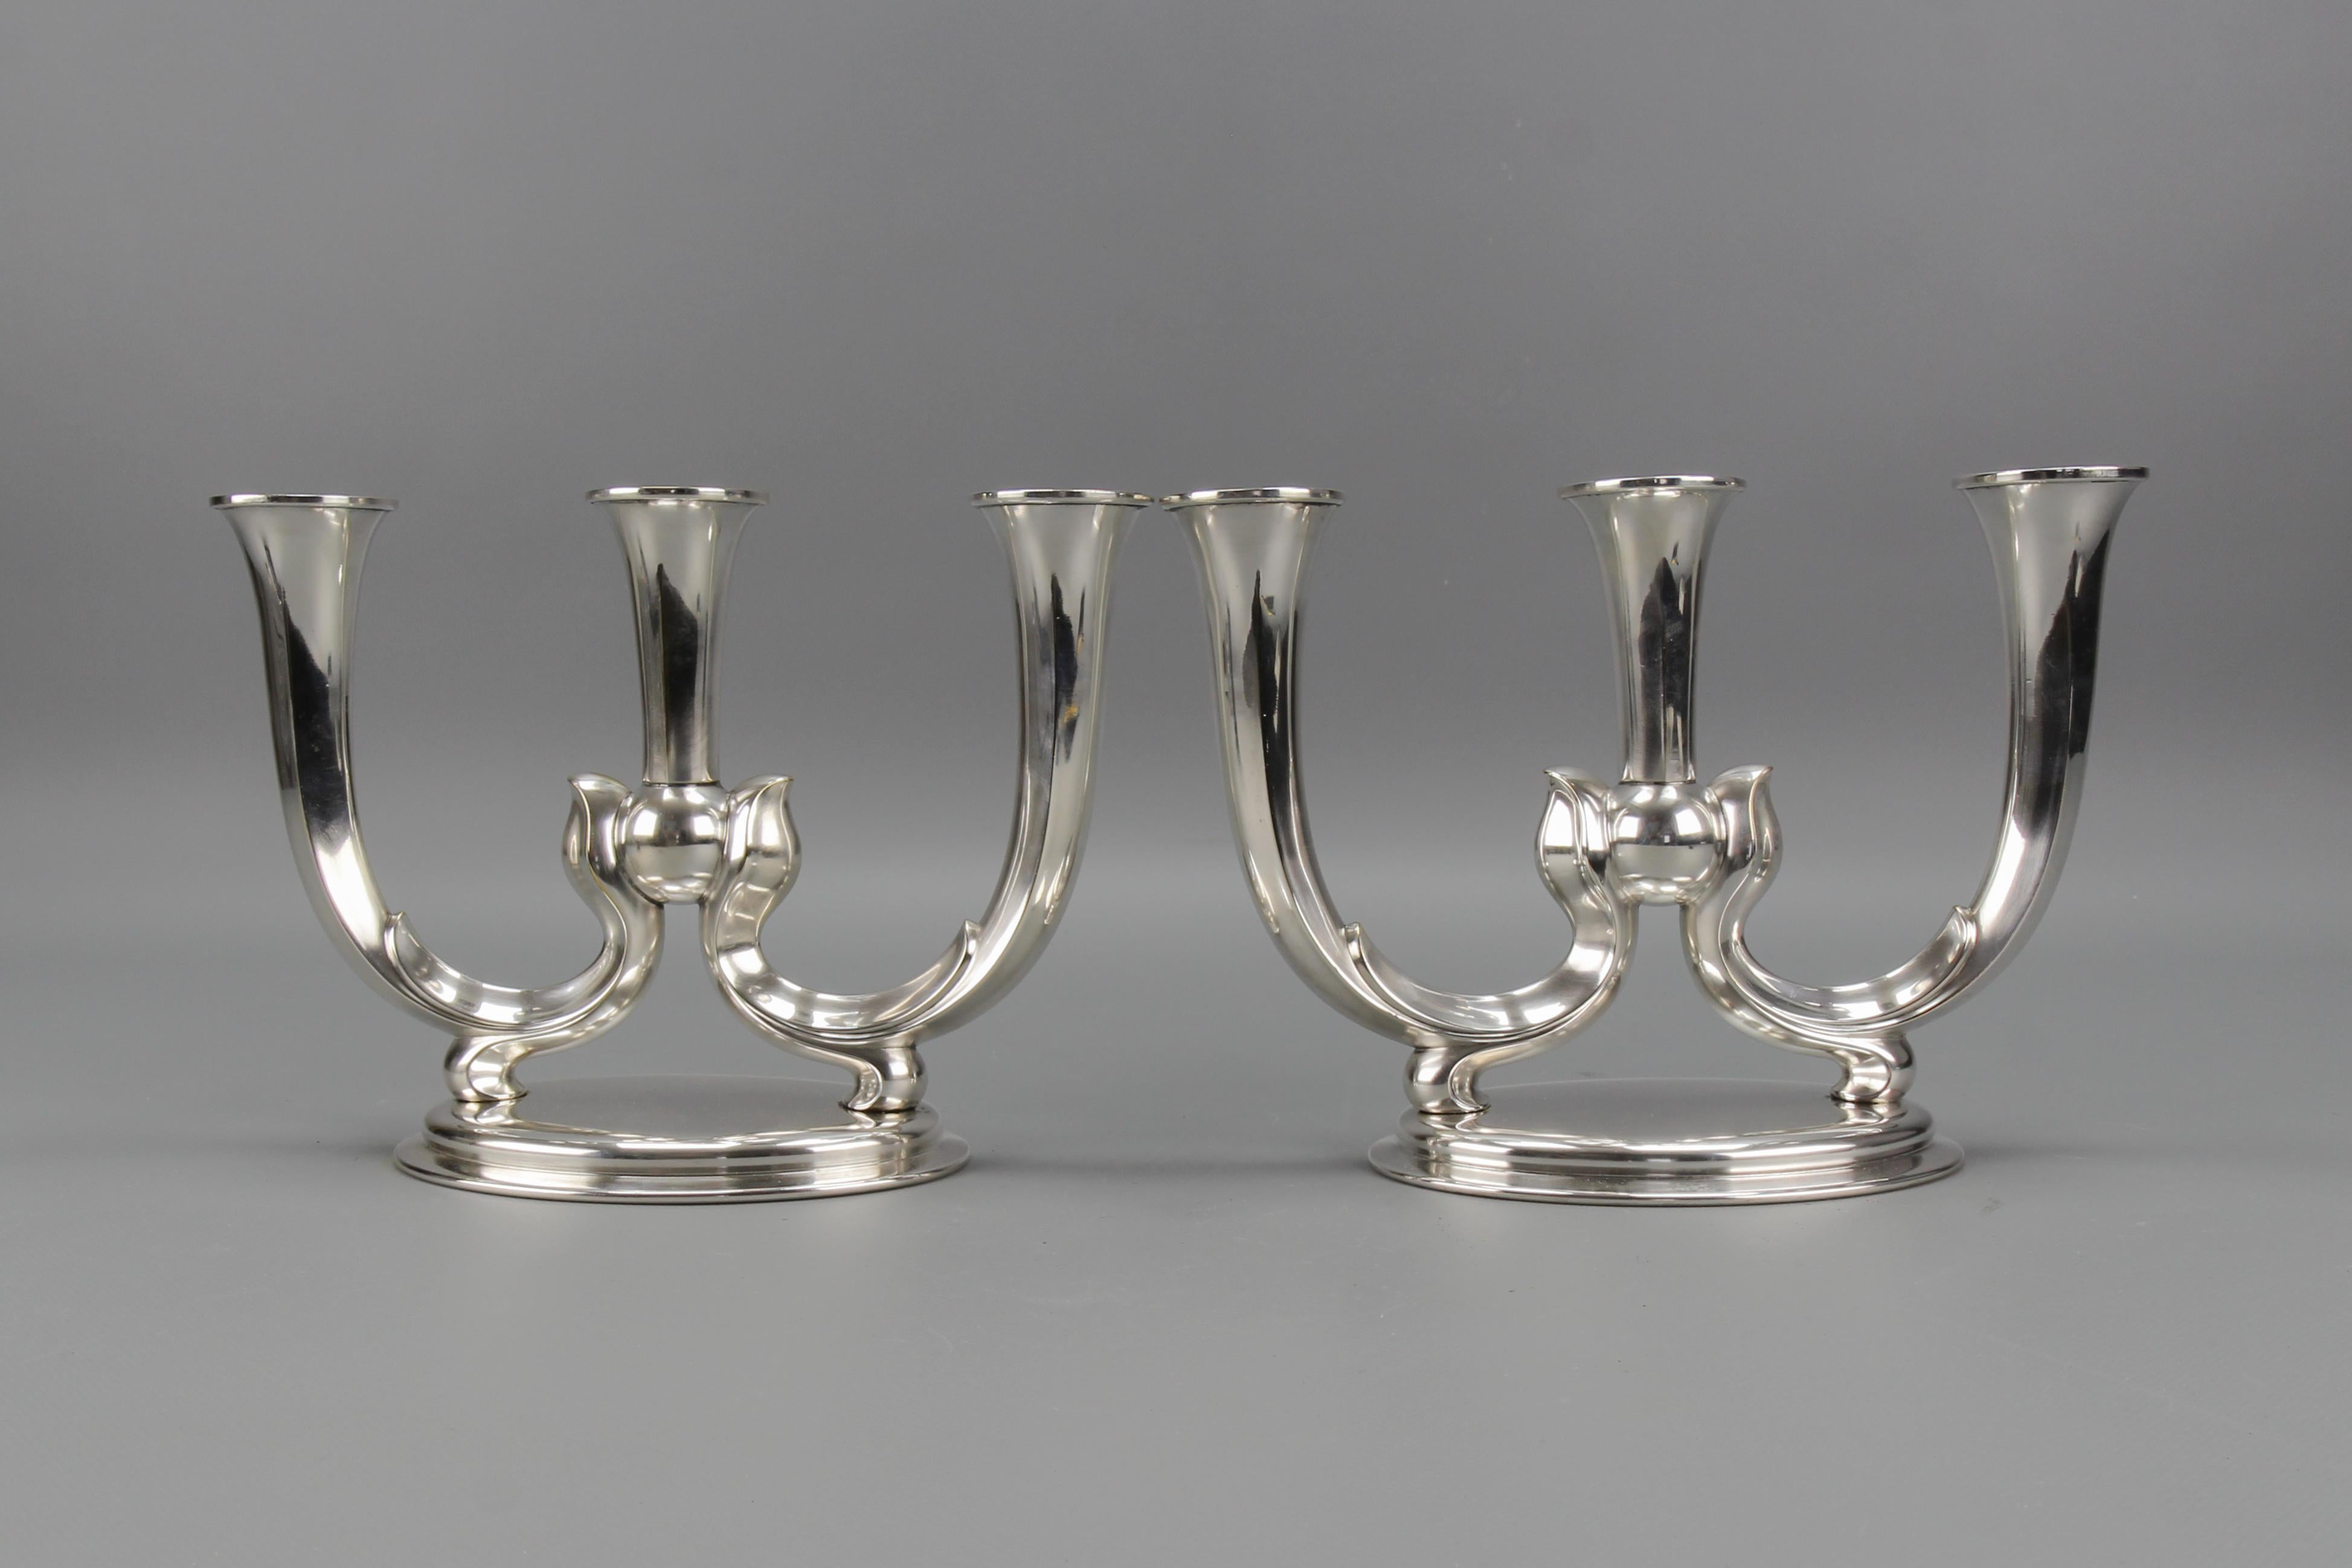 Plated Pair of German WMF Art Deco Three-Arm Candle Holders For Sale